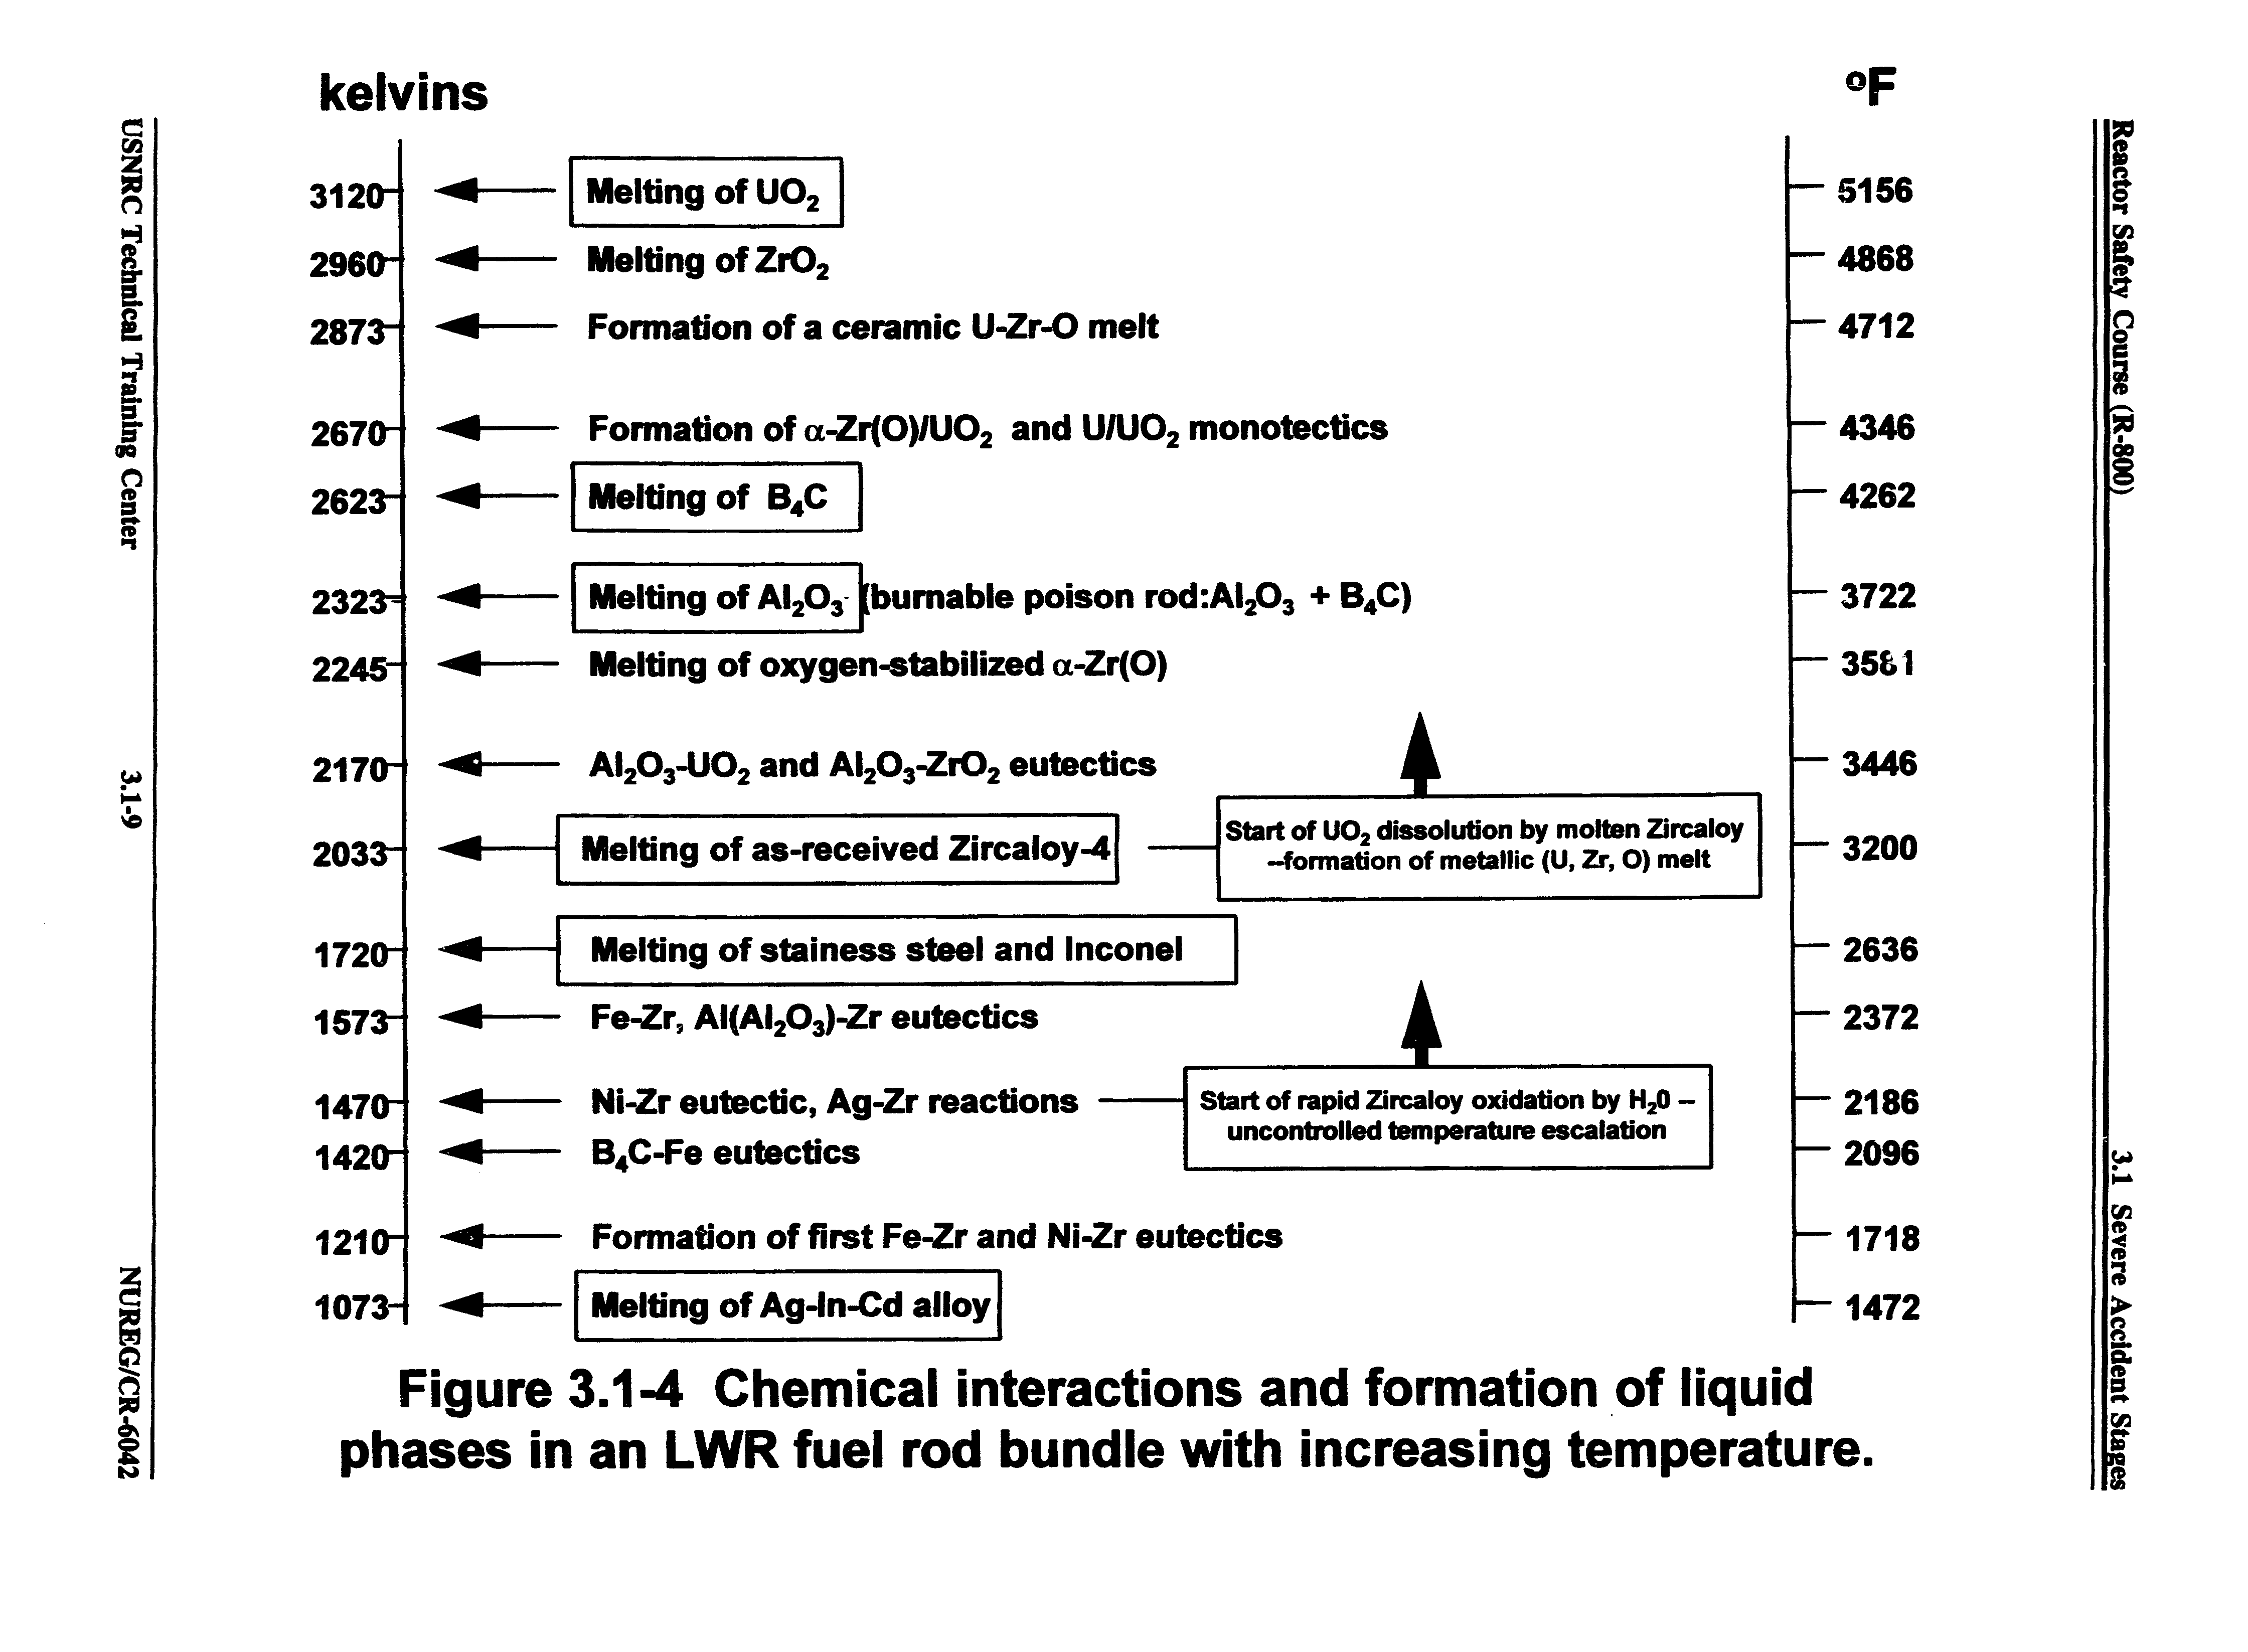 Figure 3.1-4 Chemical interactions and formation of liquid phases in an LWR fuei rod bundle with increasing temperature.